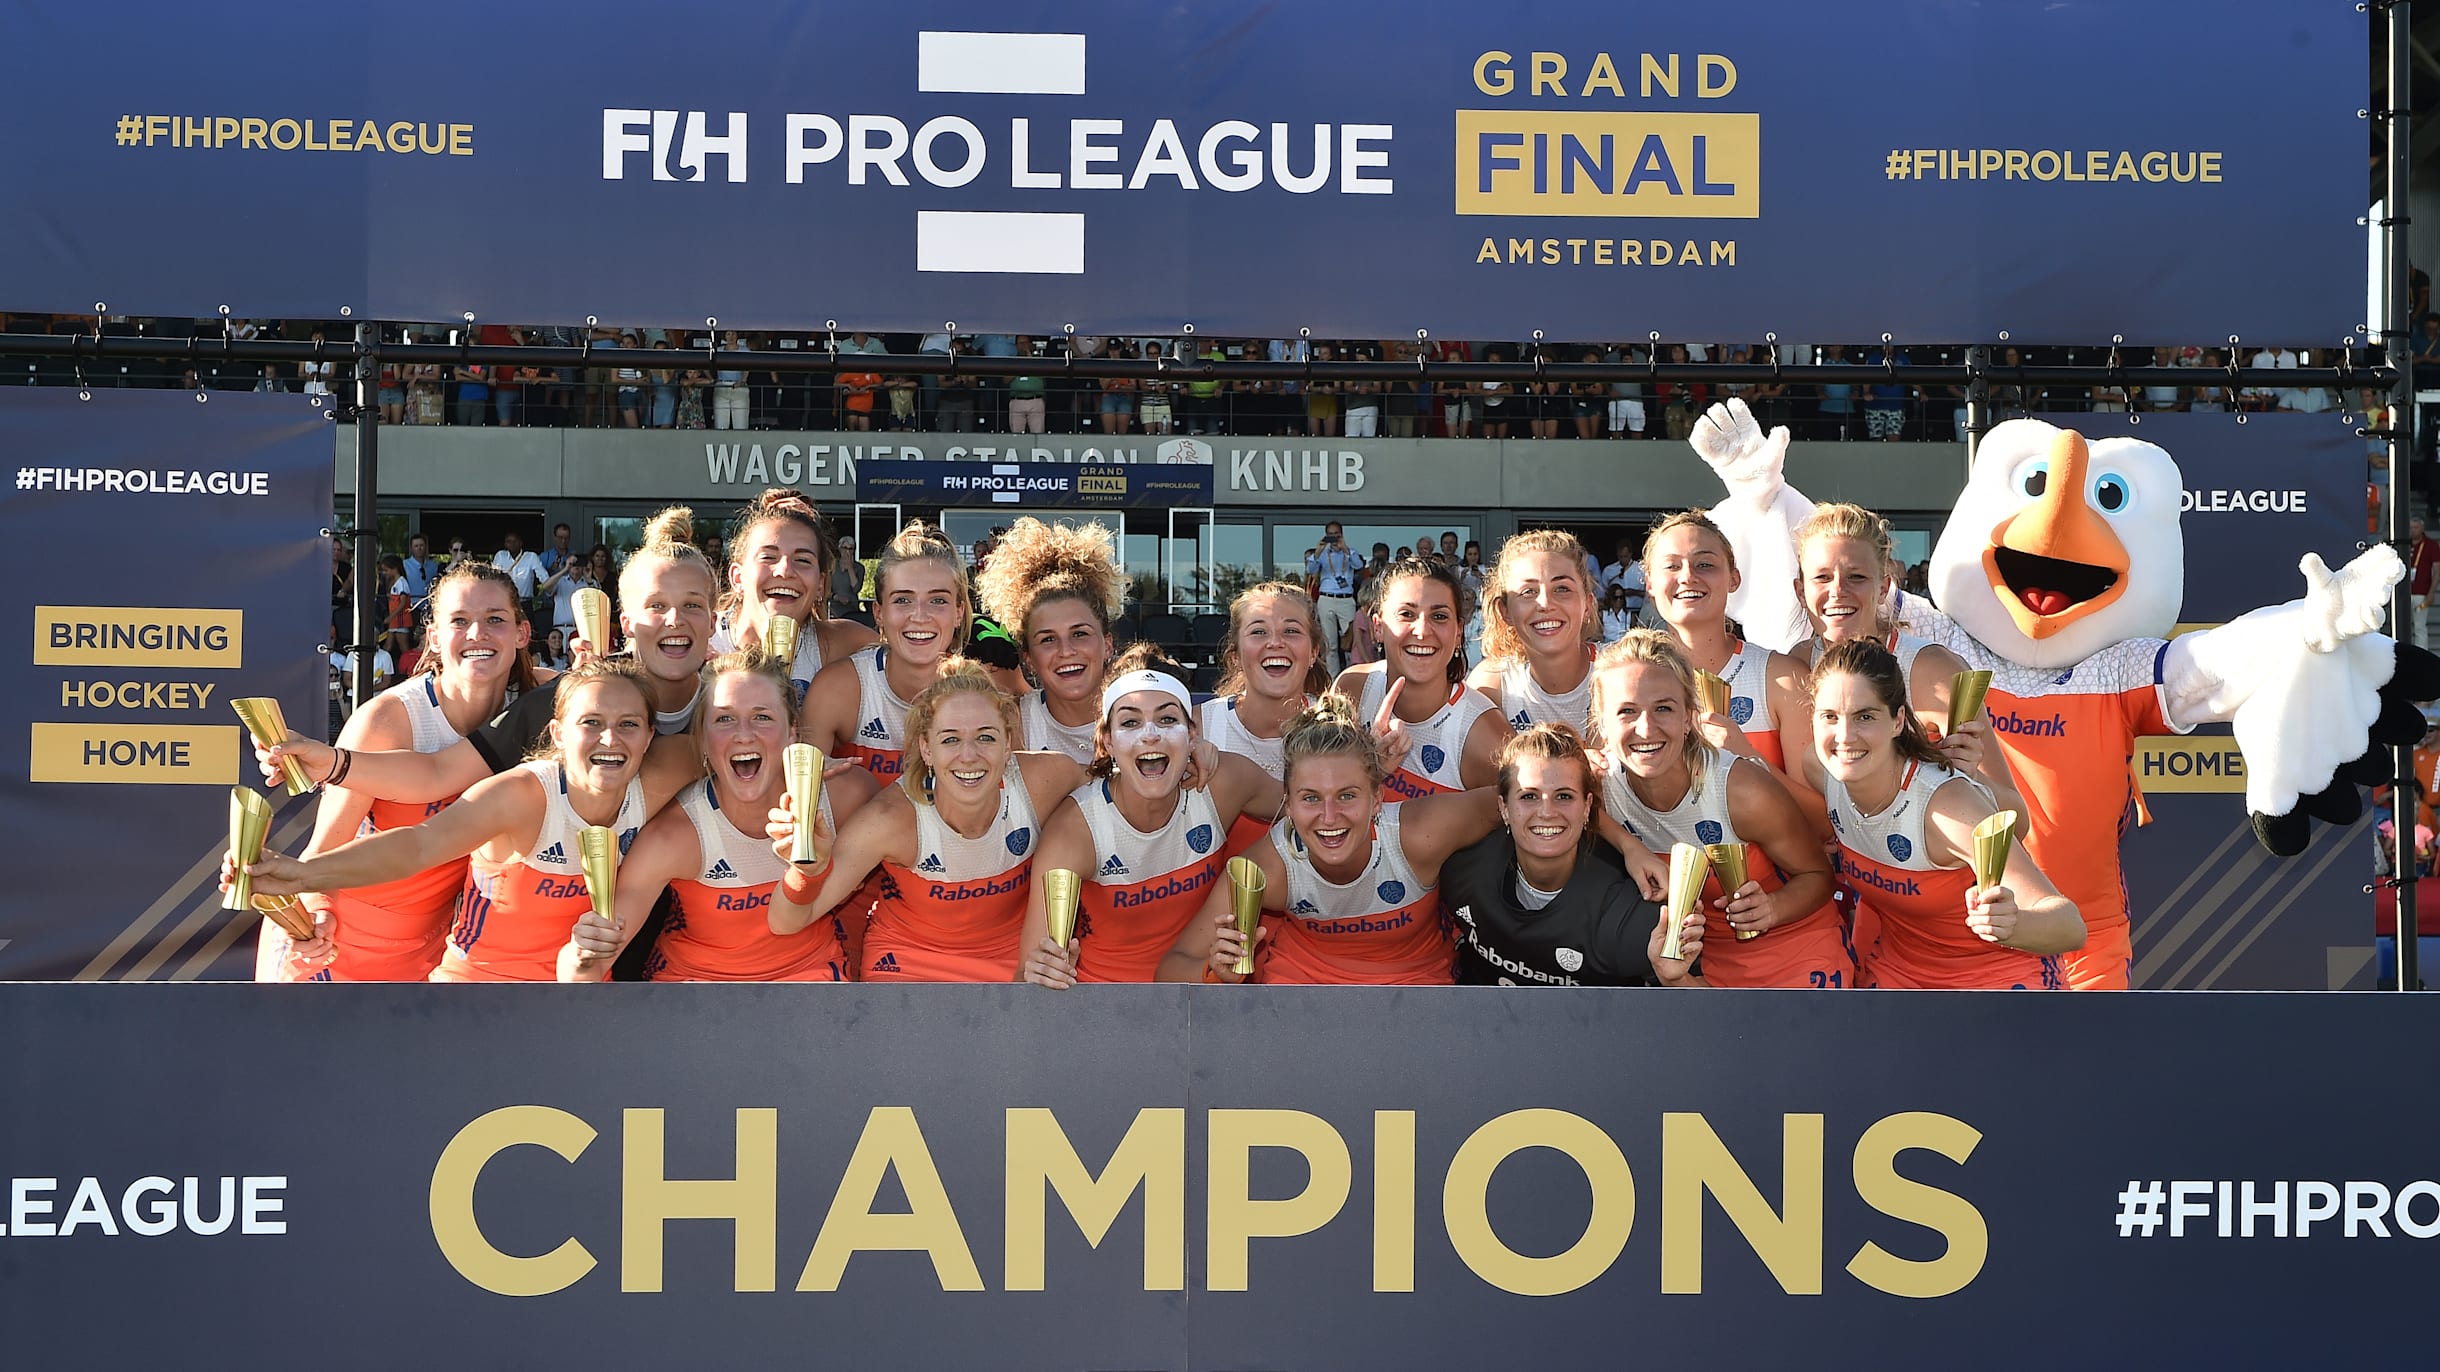 FIH Pro League winners Know all the champions